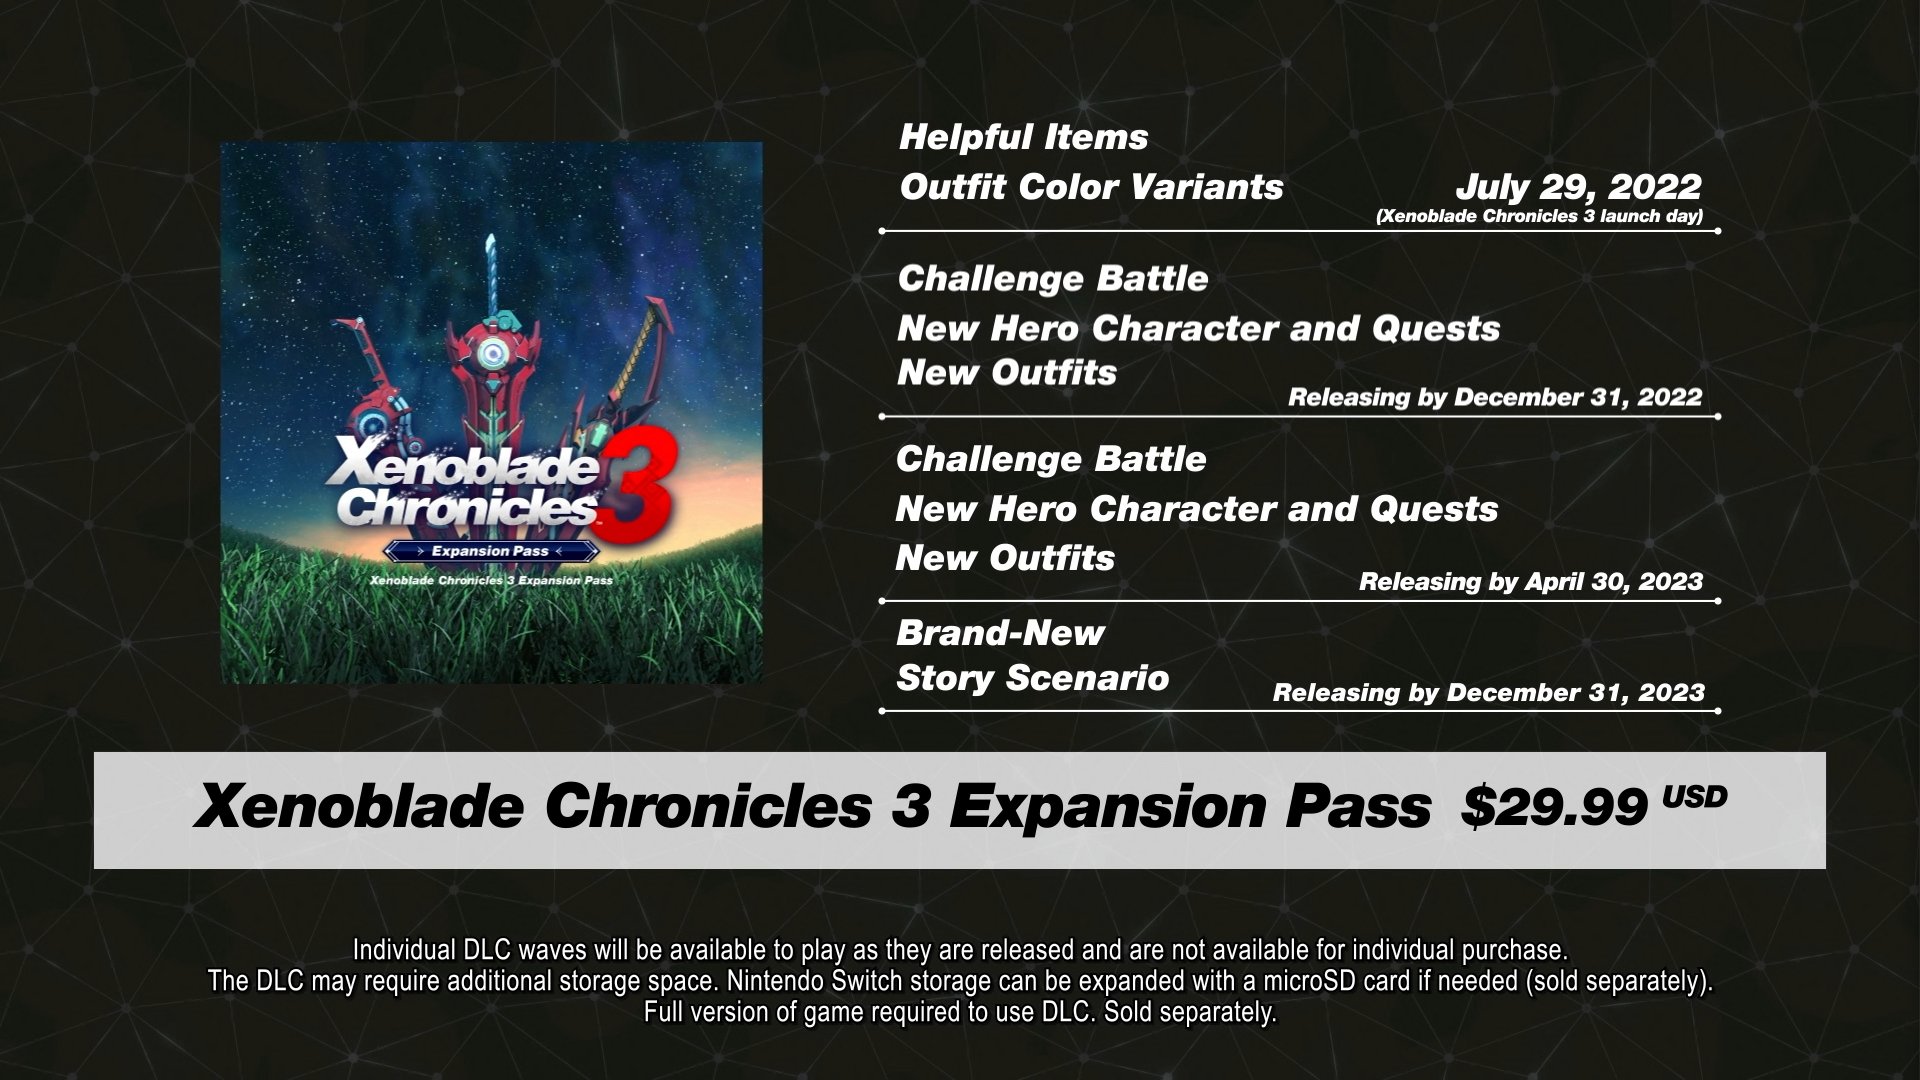 Xenoblade Chronicles 3 Expansion Pass confirms 4 DLC releases